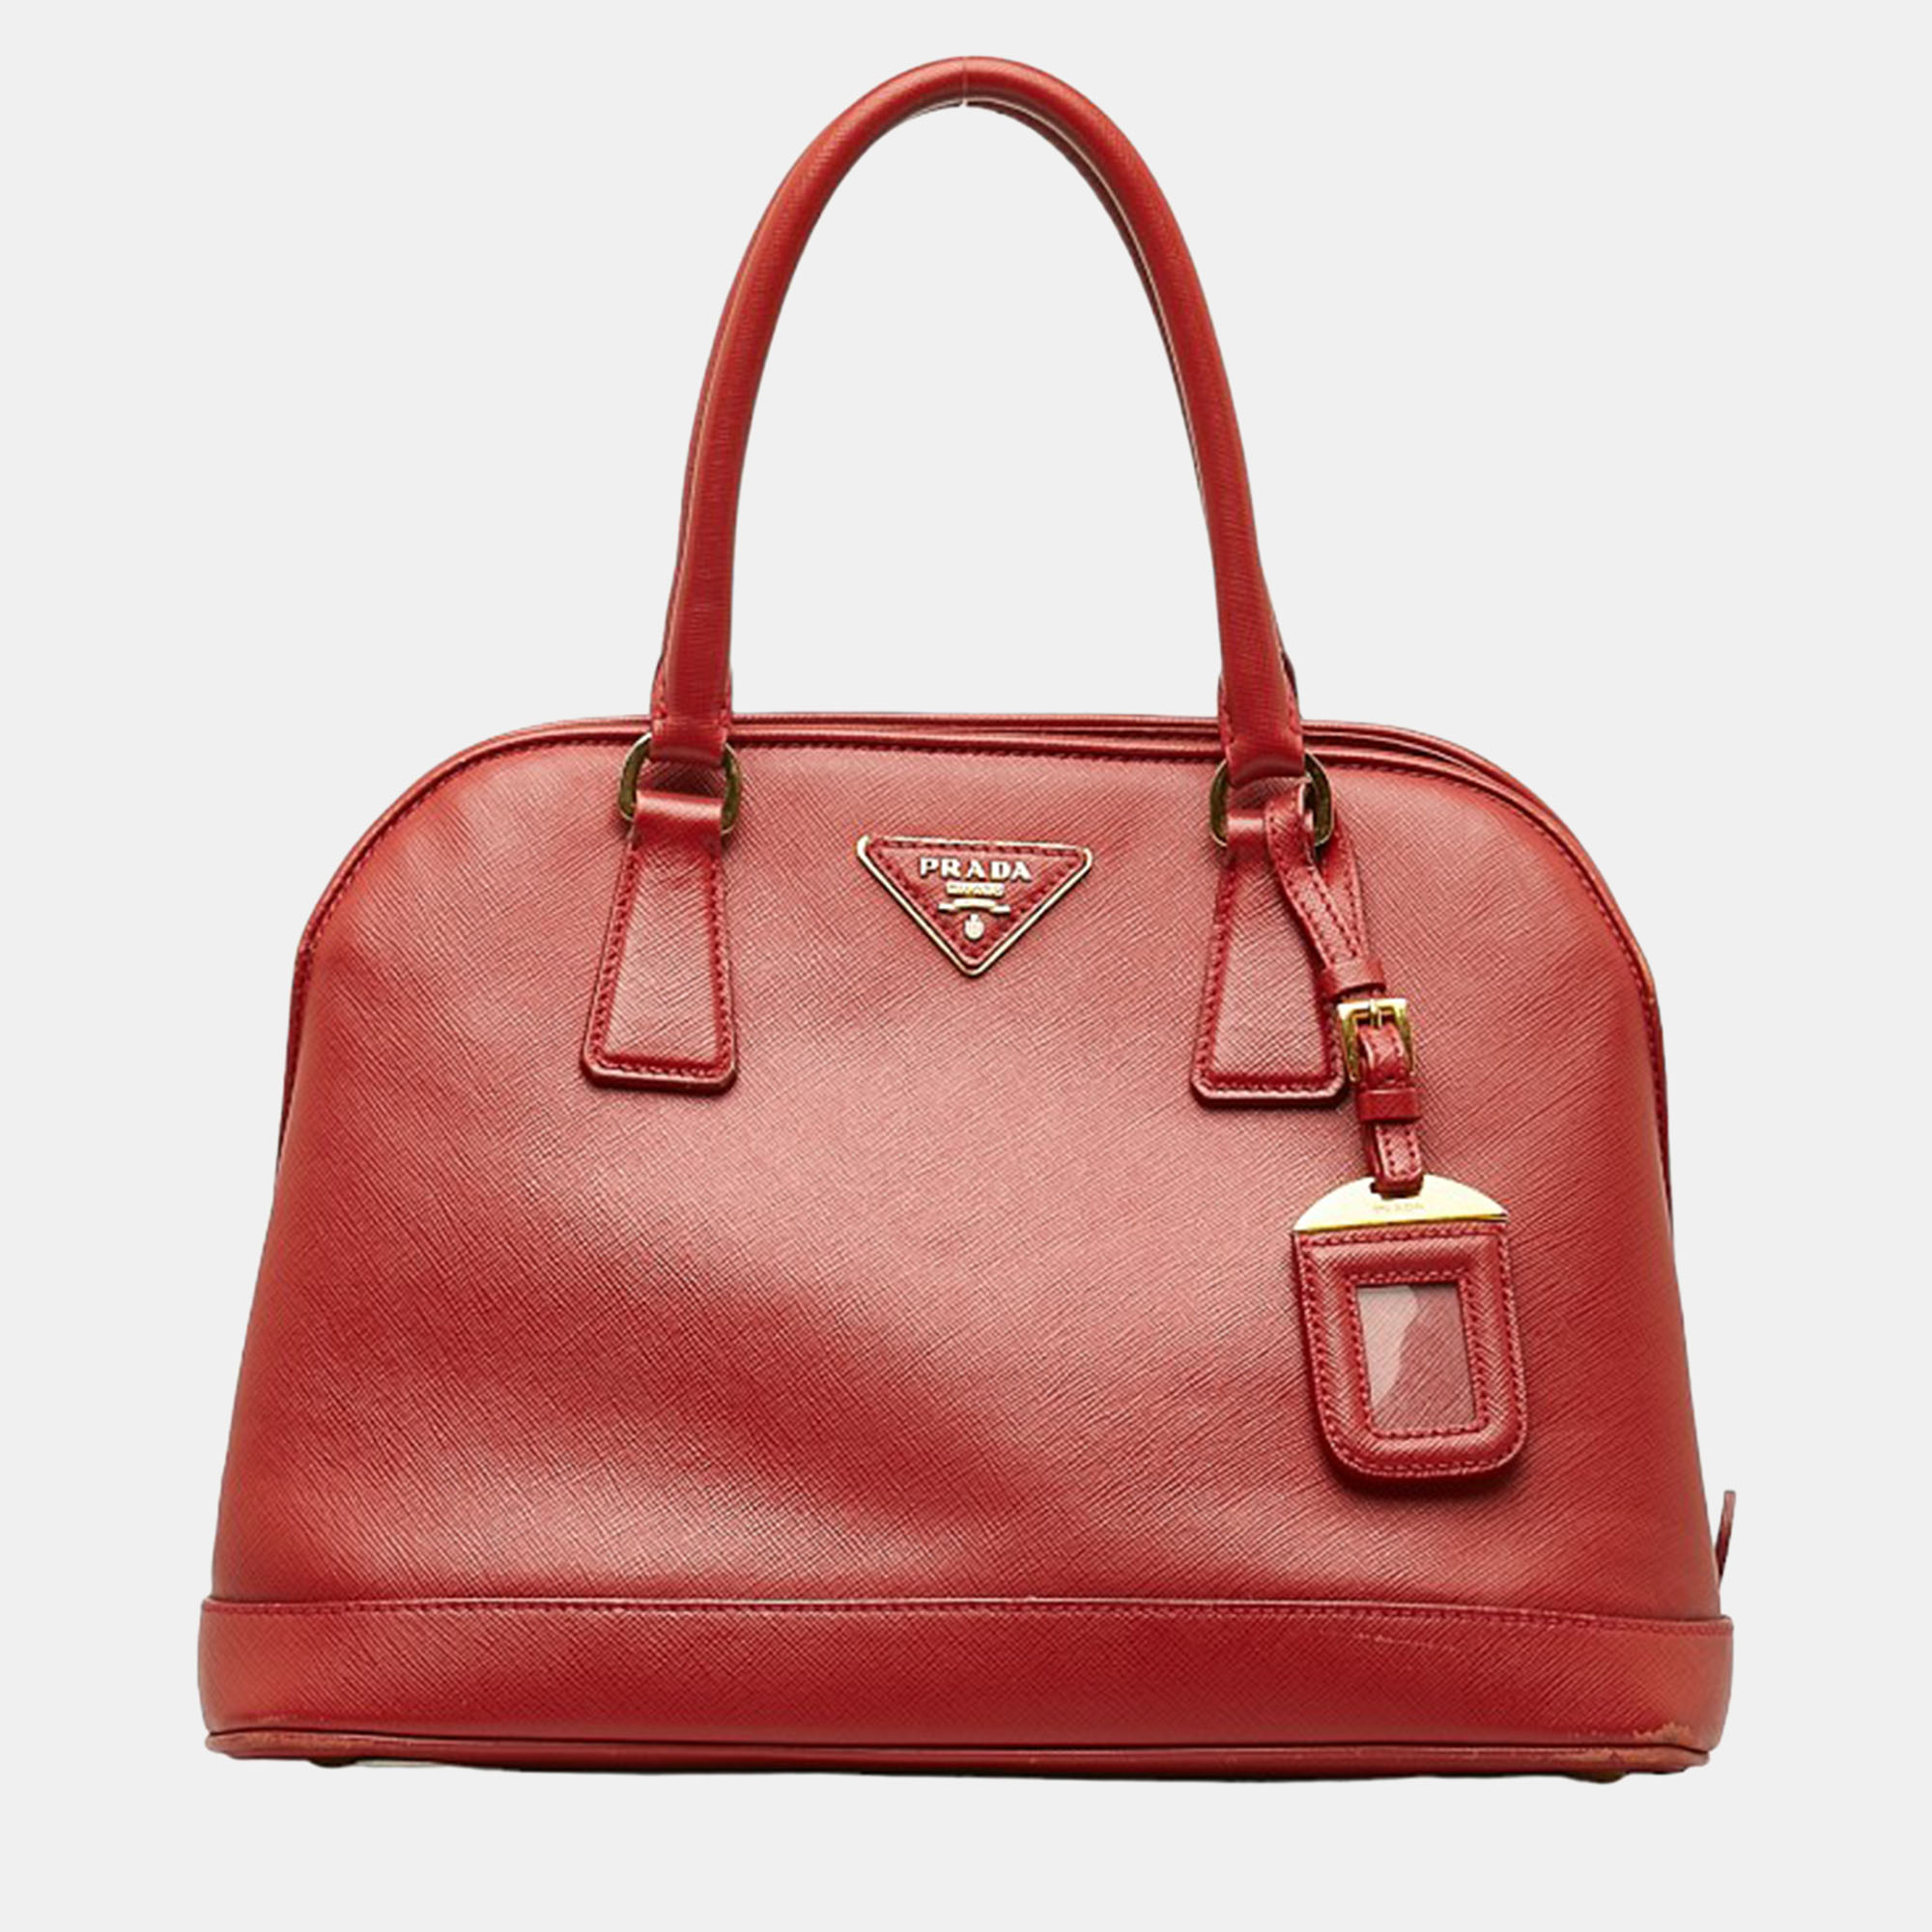 Pre-owned Prada Red Leather Saffiano Lux Dome Bag